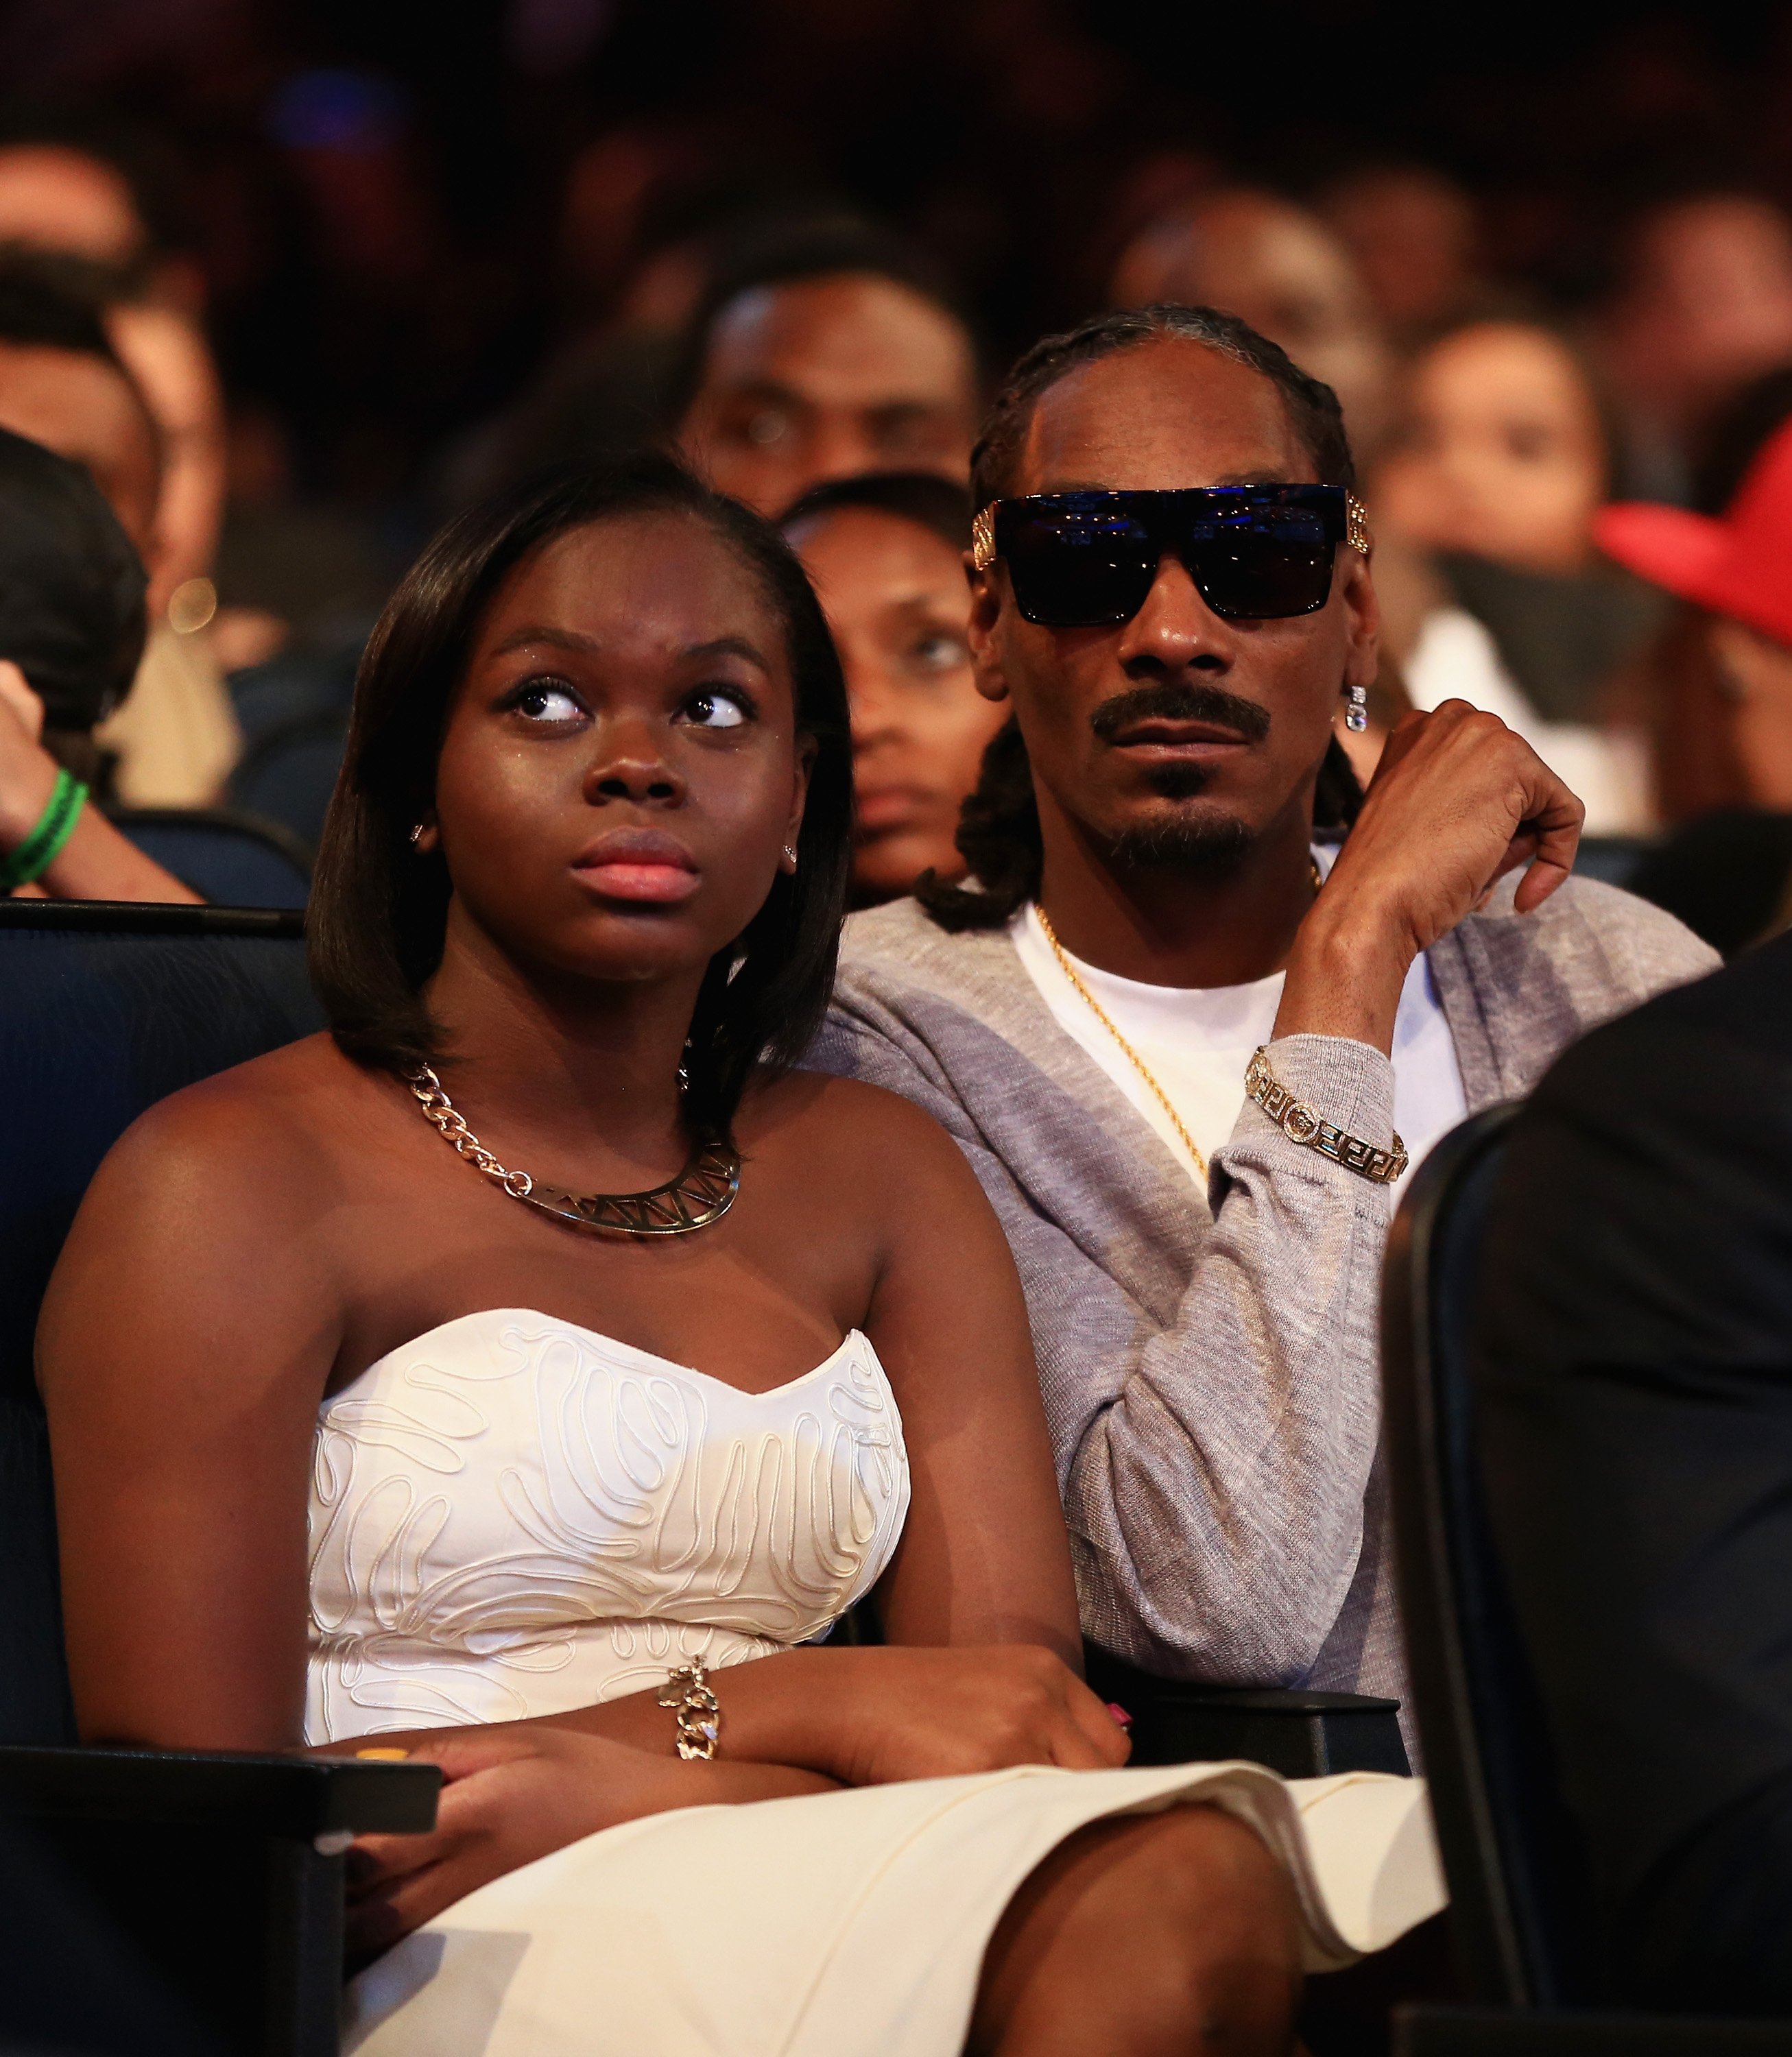 Snoop Dogg & Cori Broadus at the BET AWARDS on June 29, 2014 in California | Photo: Getty Images